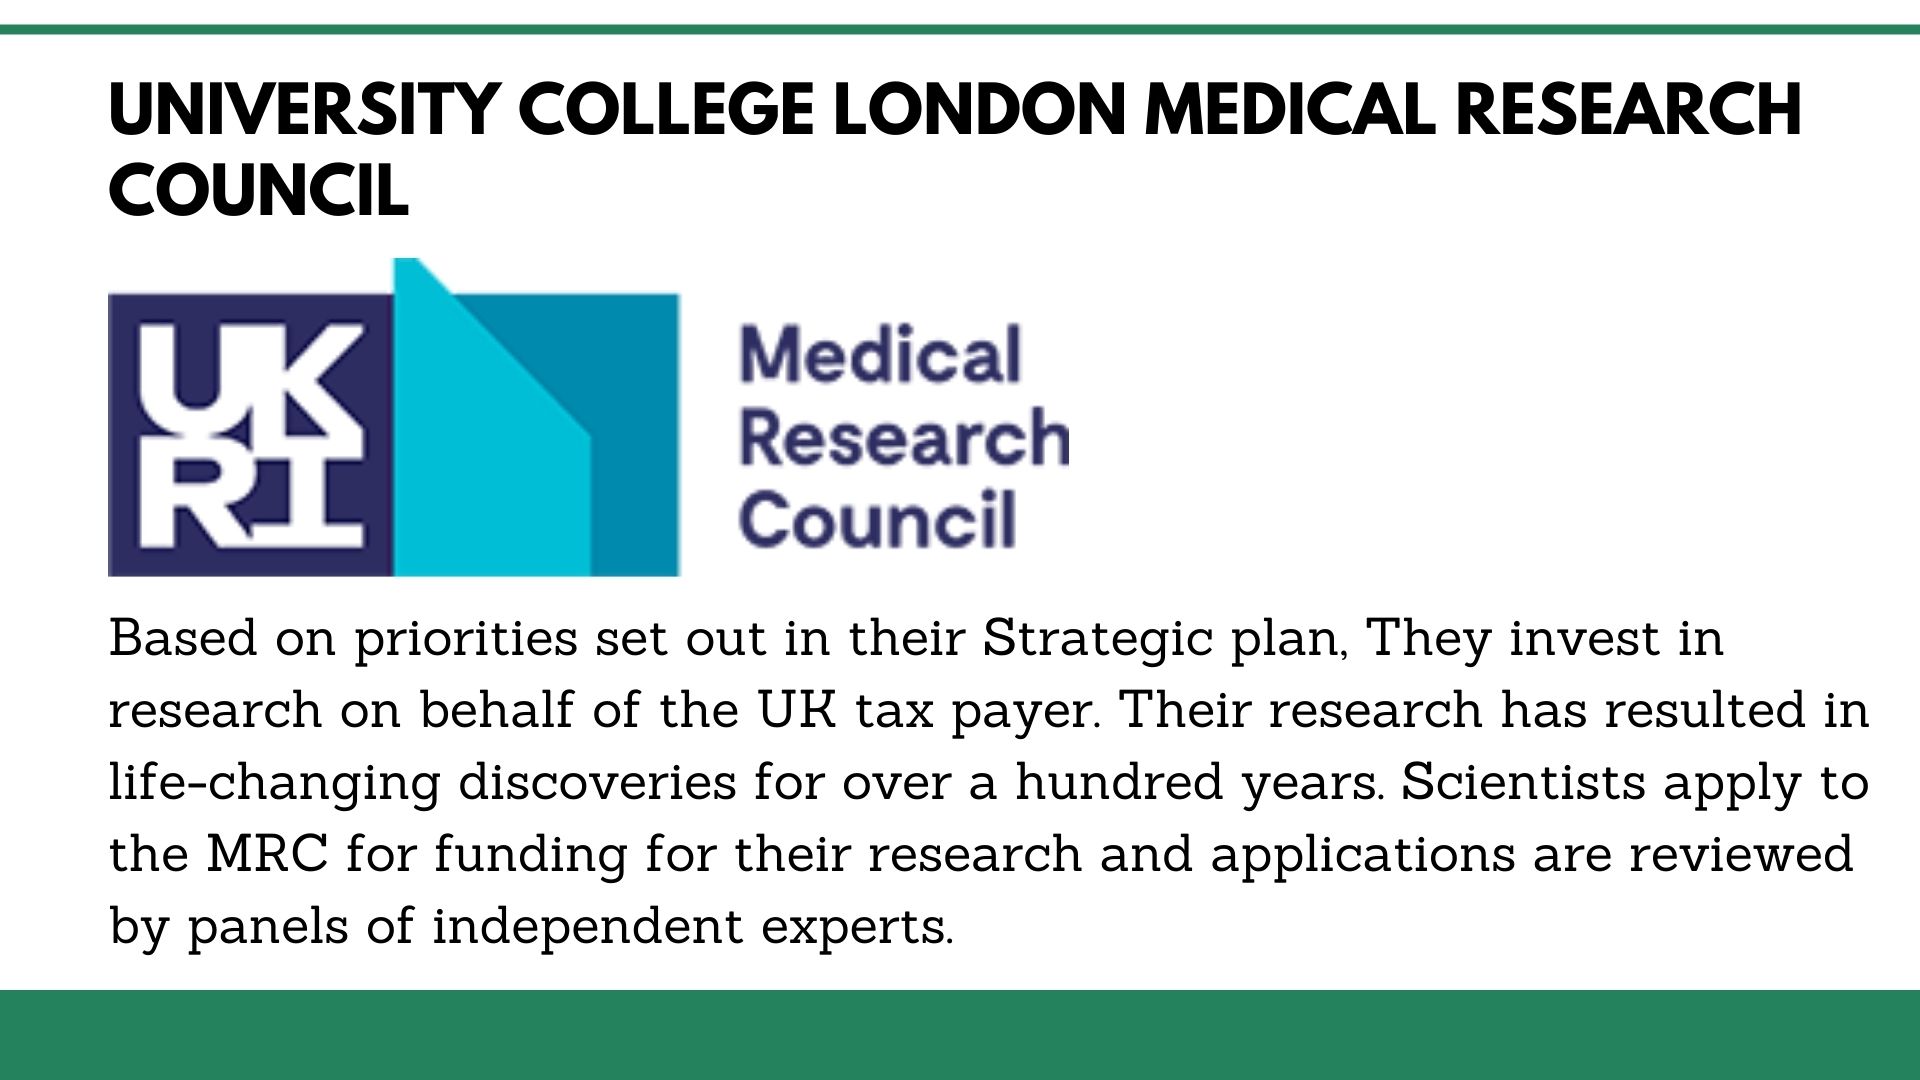 University College London Medical Research Council	